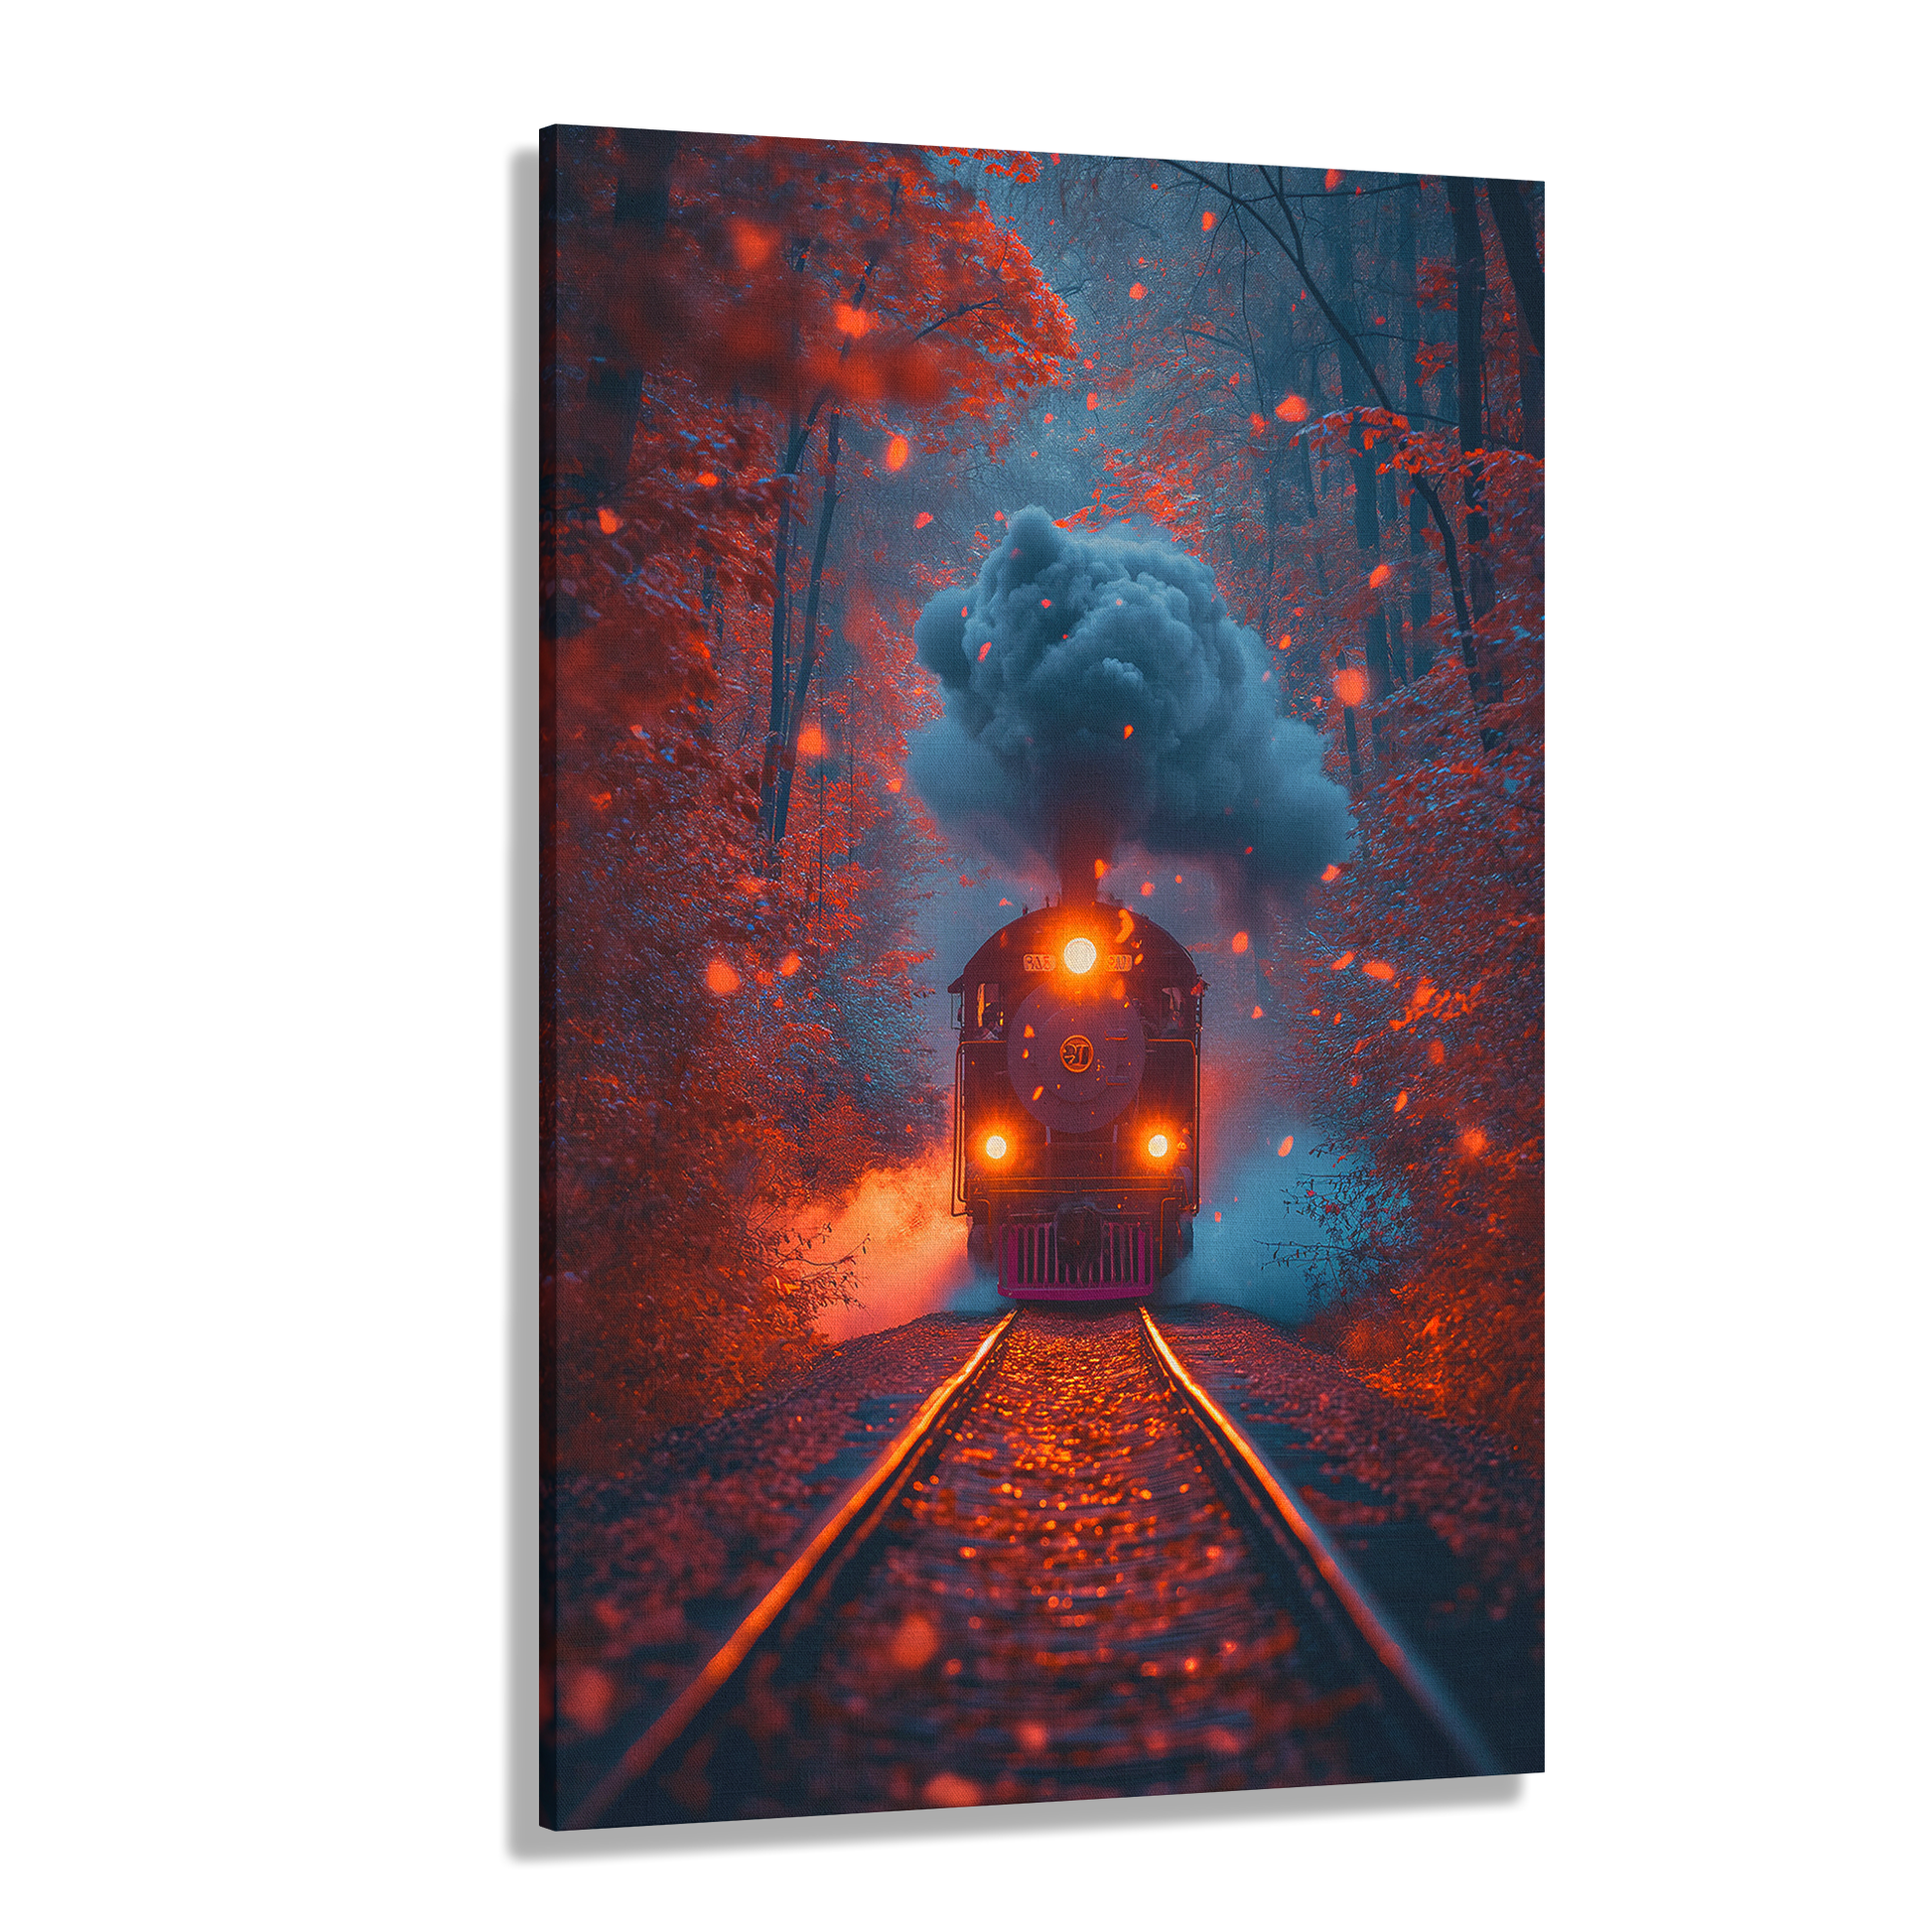 Autumn Journey (Canvas)Autumn Journey Experience the fusion of art and ethics with RimaGallery's eco-friendly canvases. Stunning visuals, diverse sizes, and sustainable materials. TransforRimaGallery